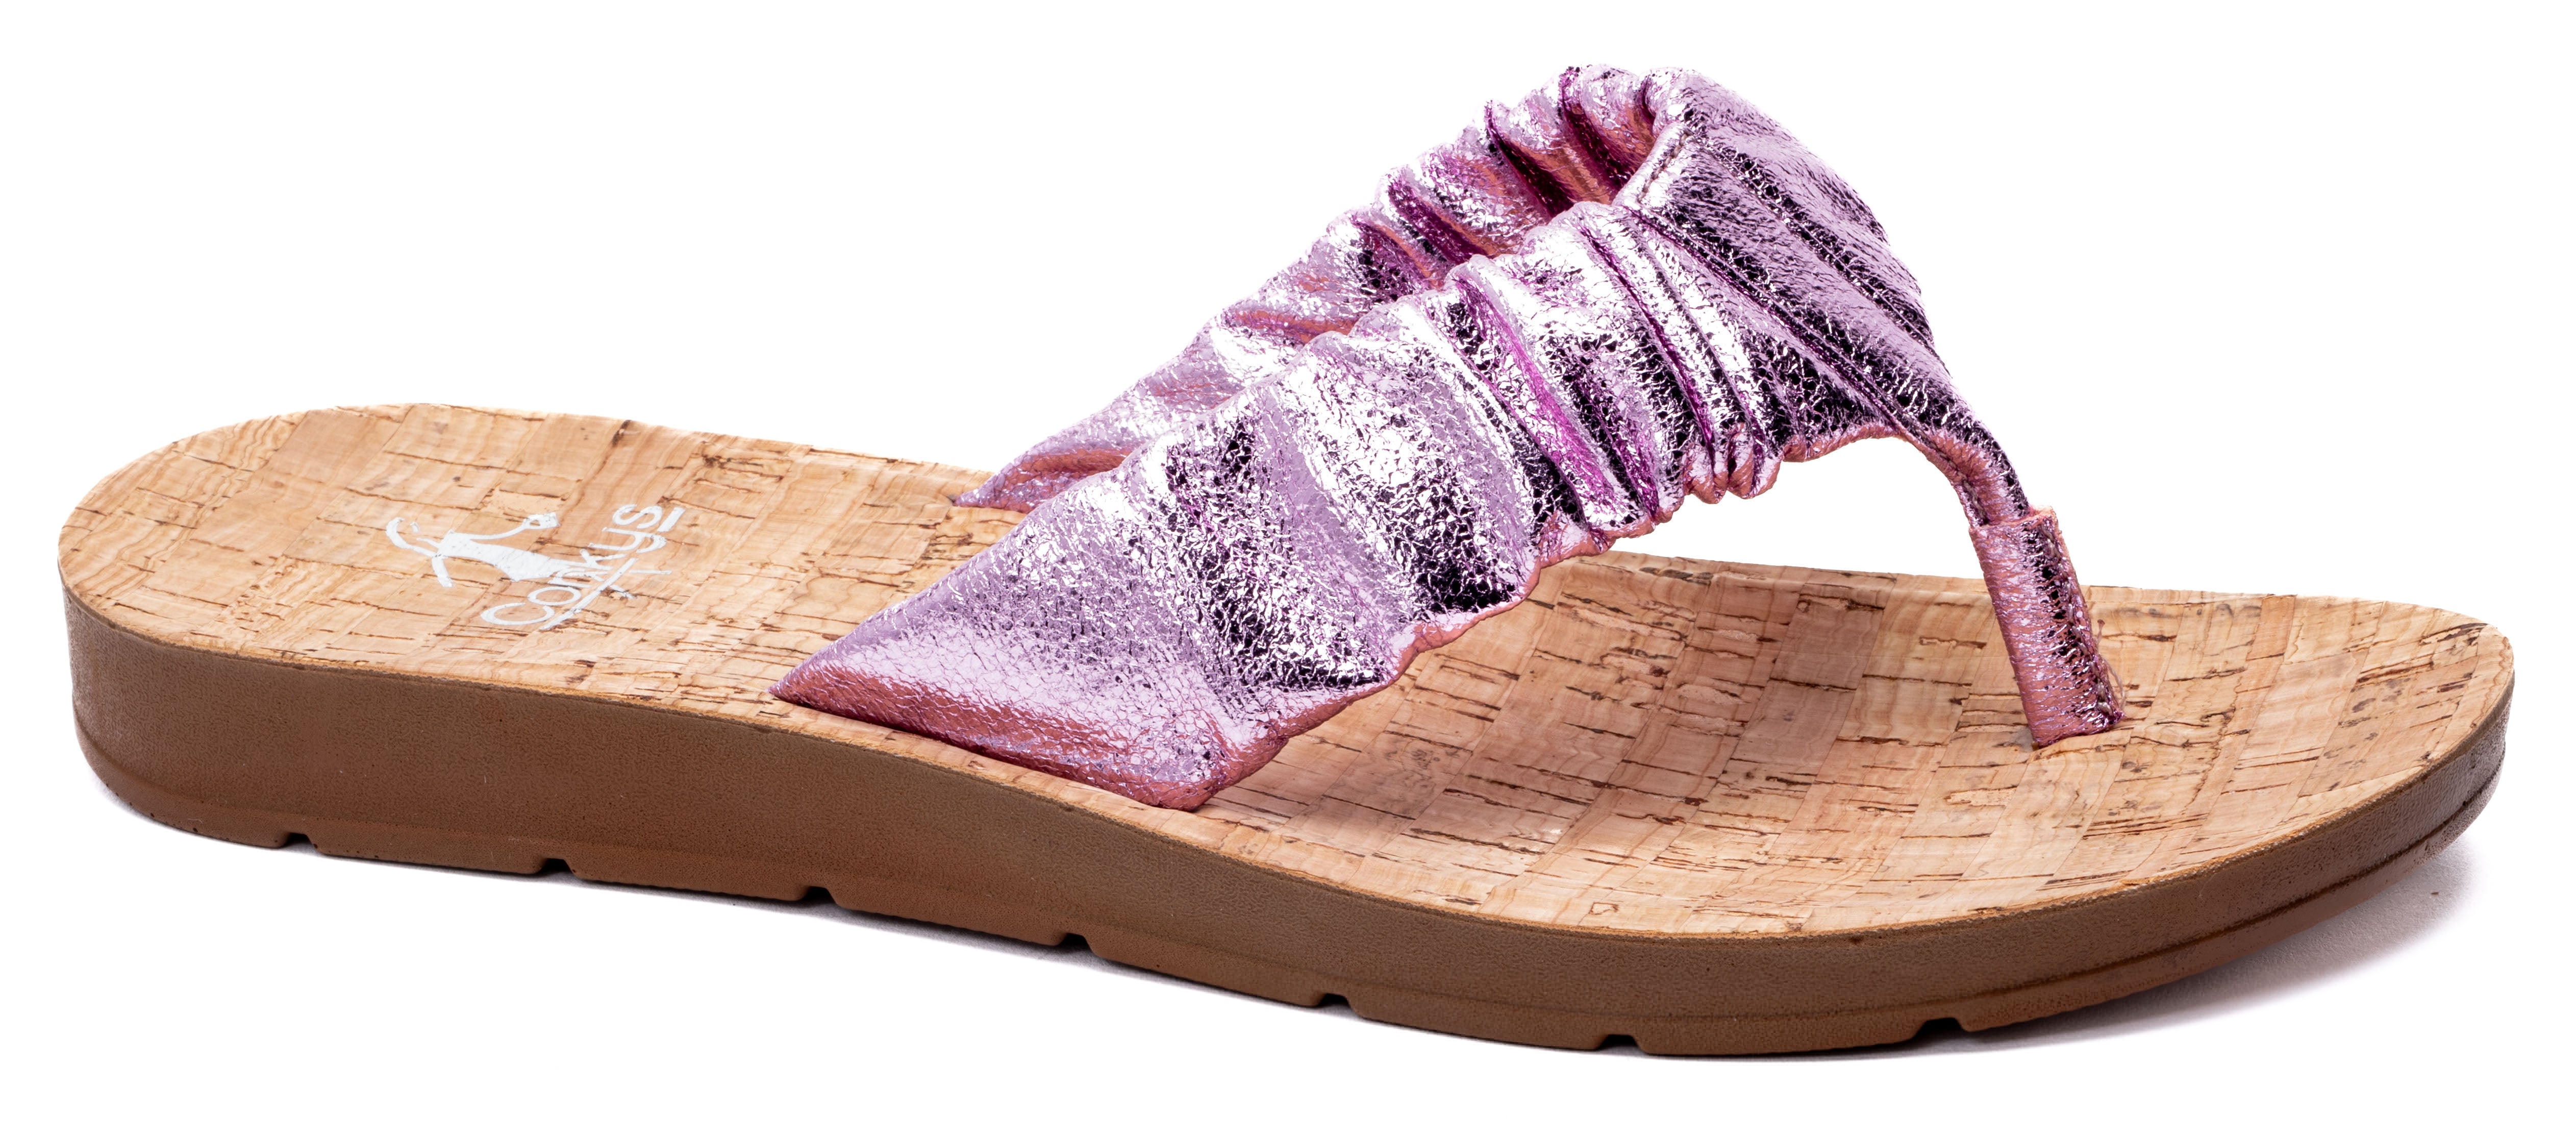 Cool Off Sandal by Corky’s